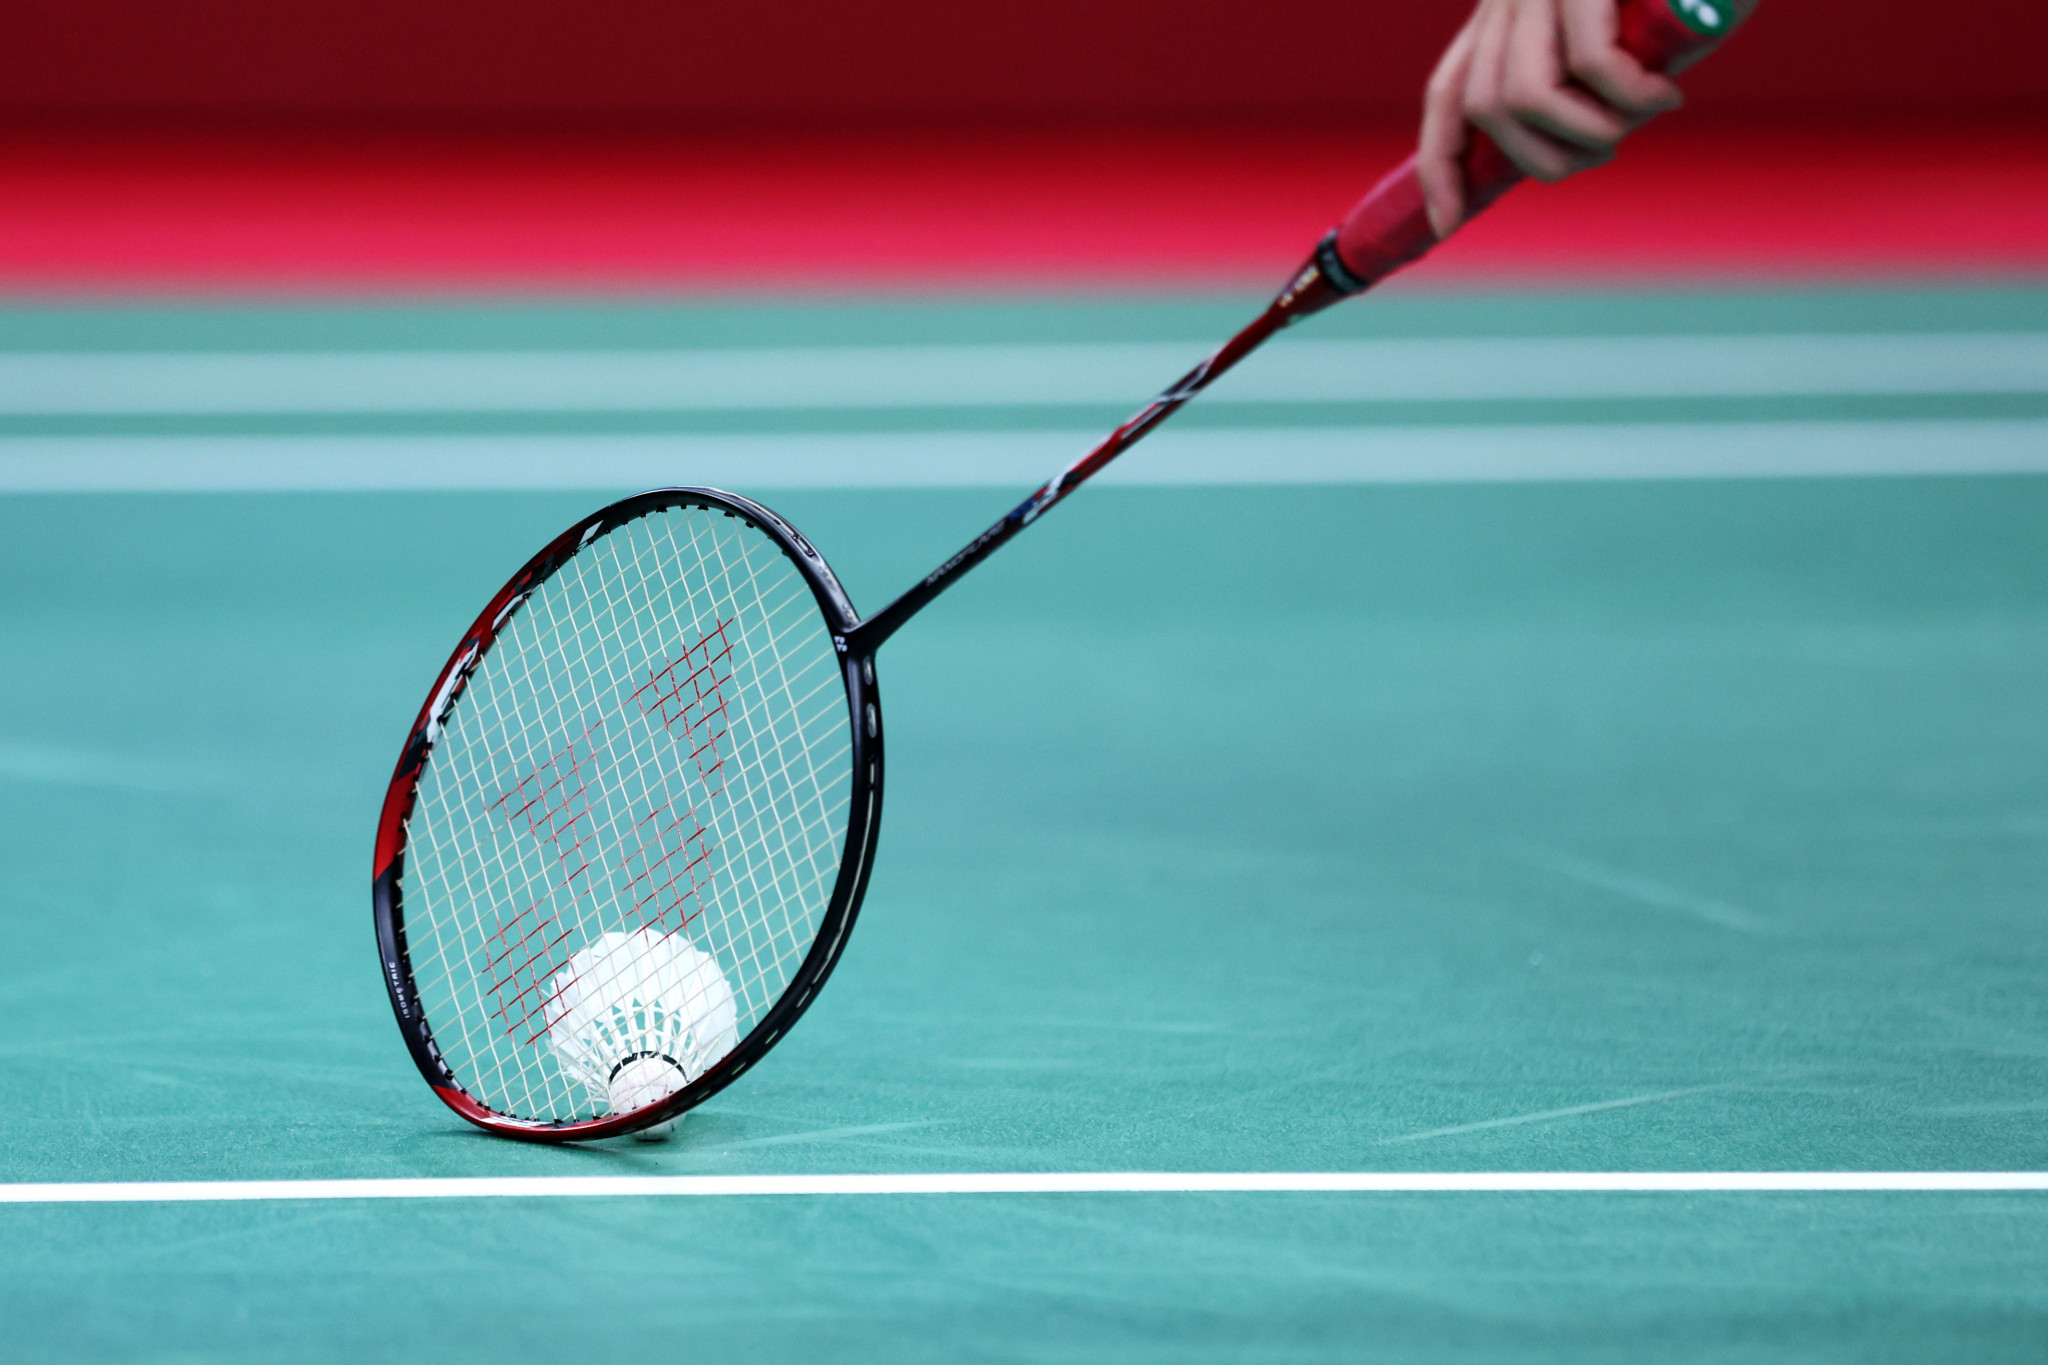 Manila to host Badminton Asia Championships after two-year break